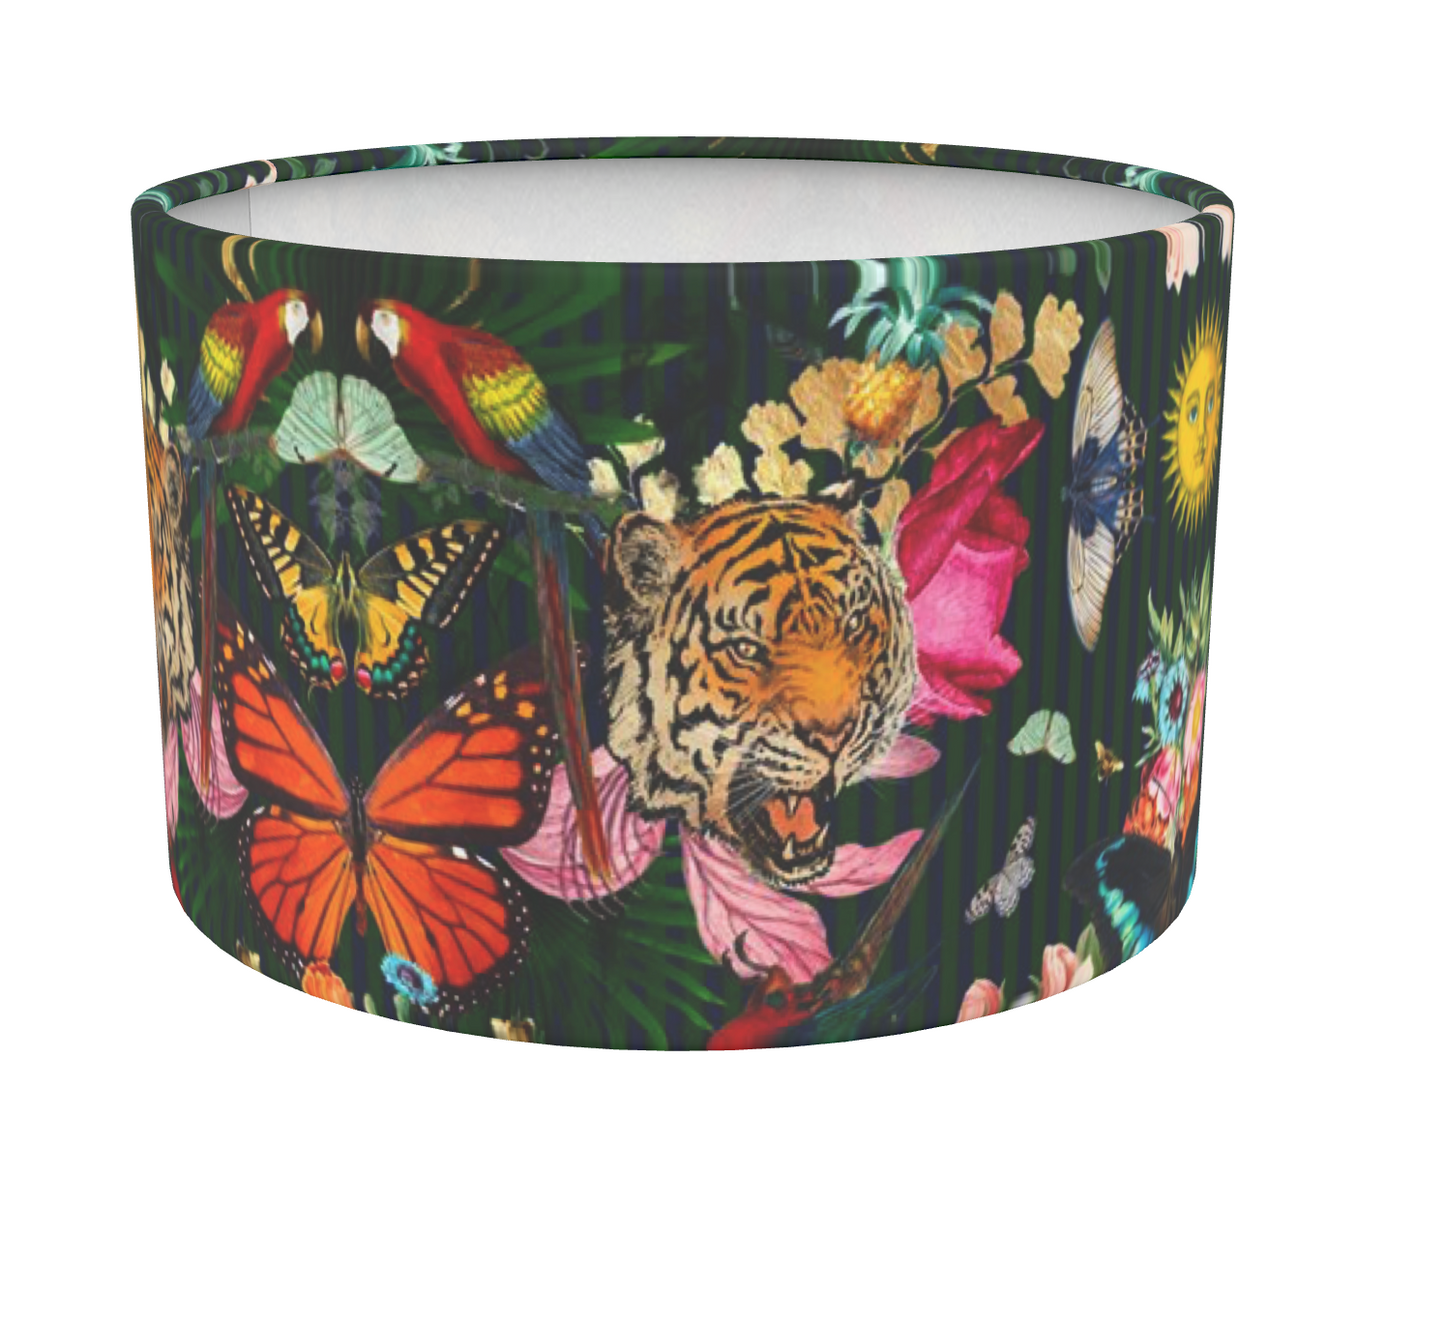 Paradise Lost 'Night' Drum Lamp Shade - Lux soft touch velvet